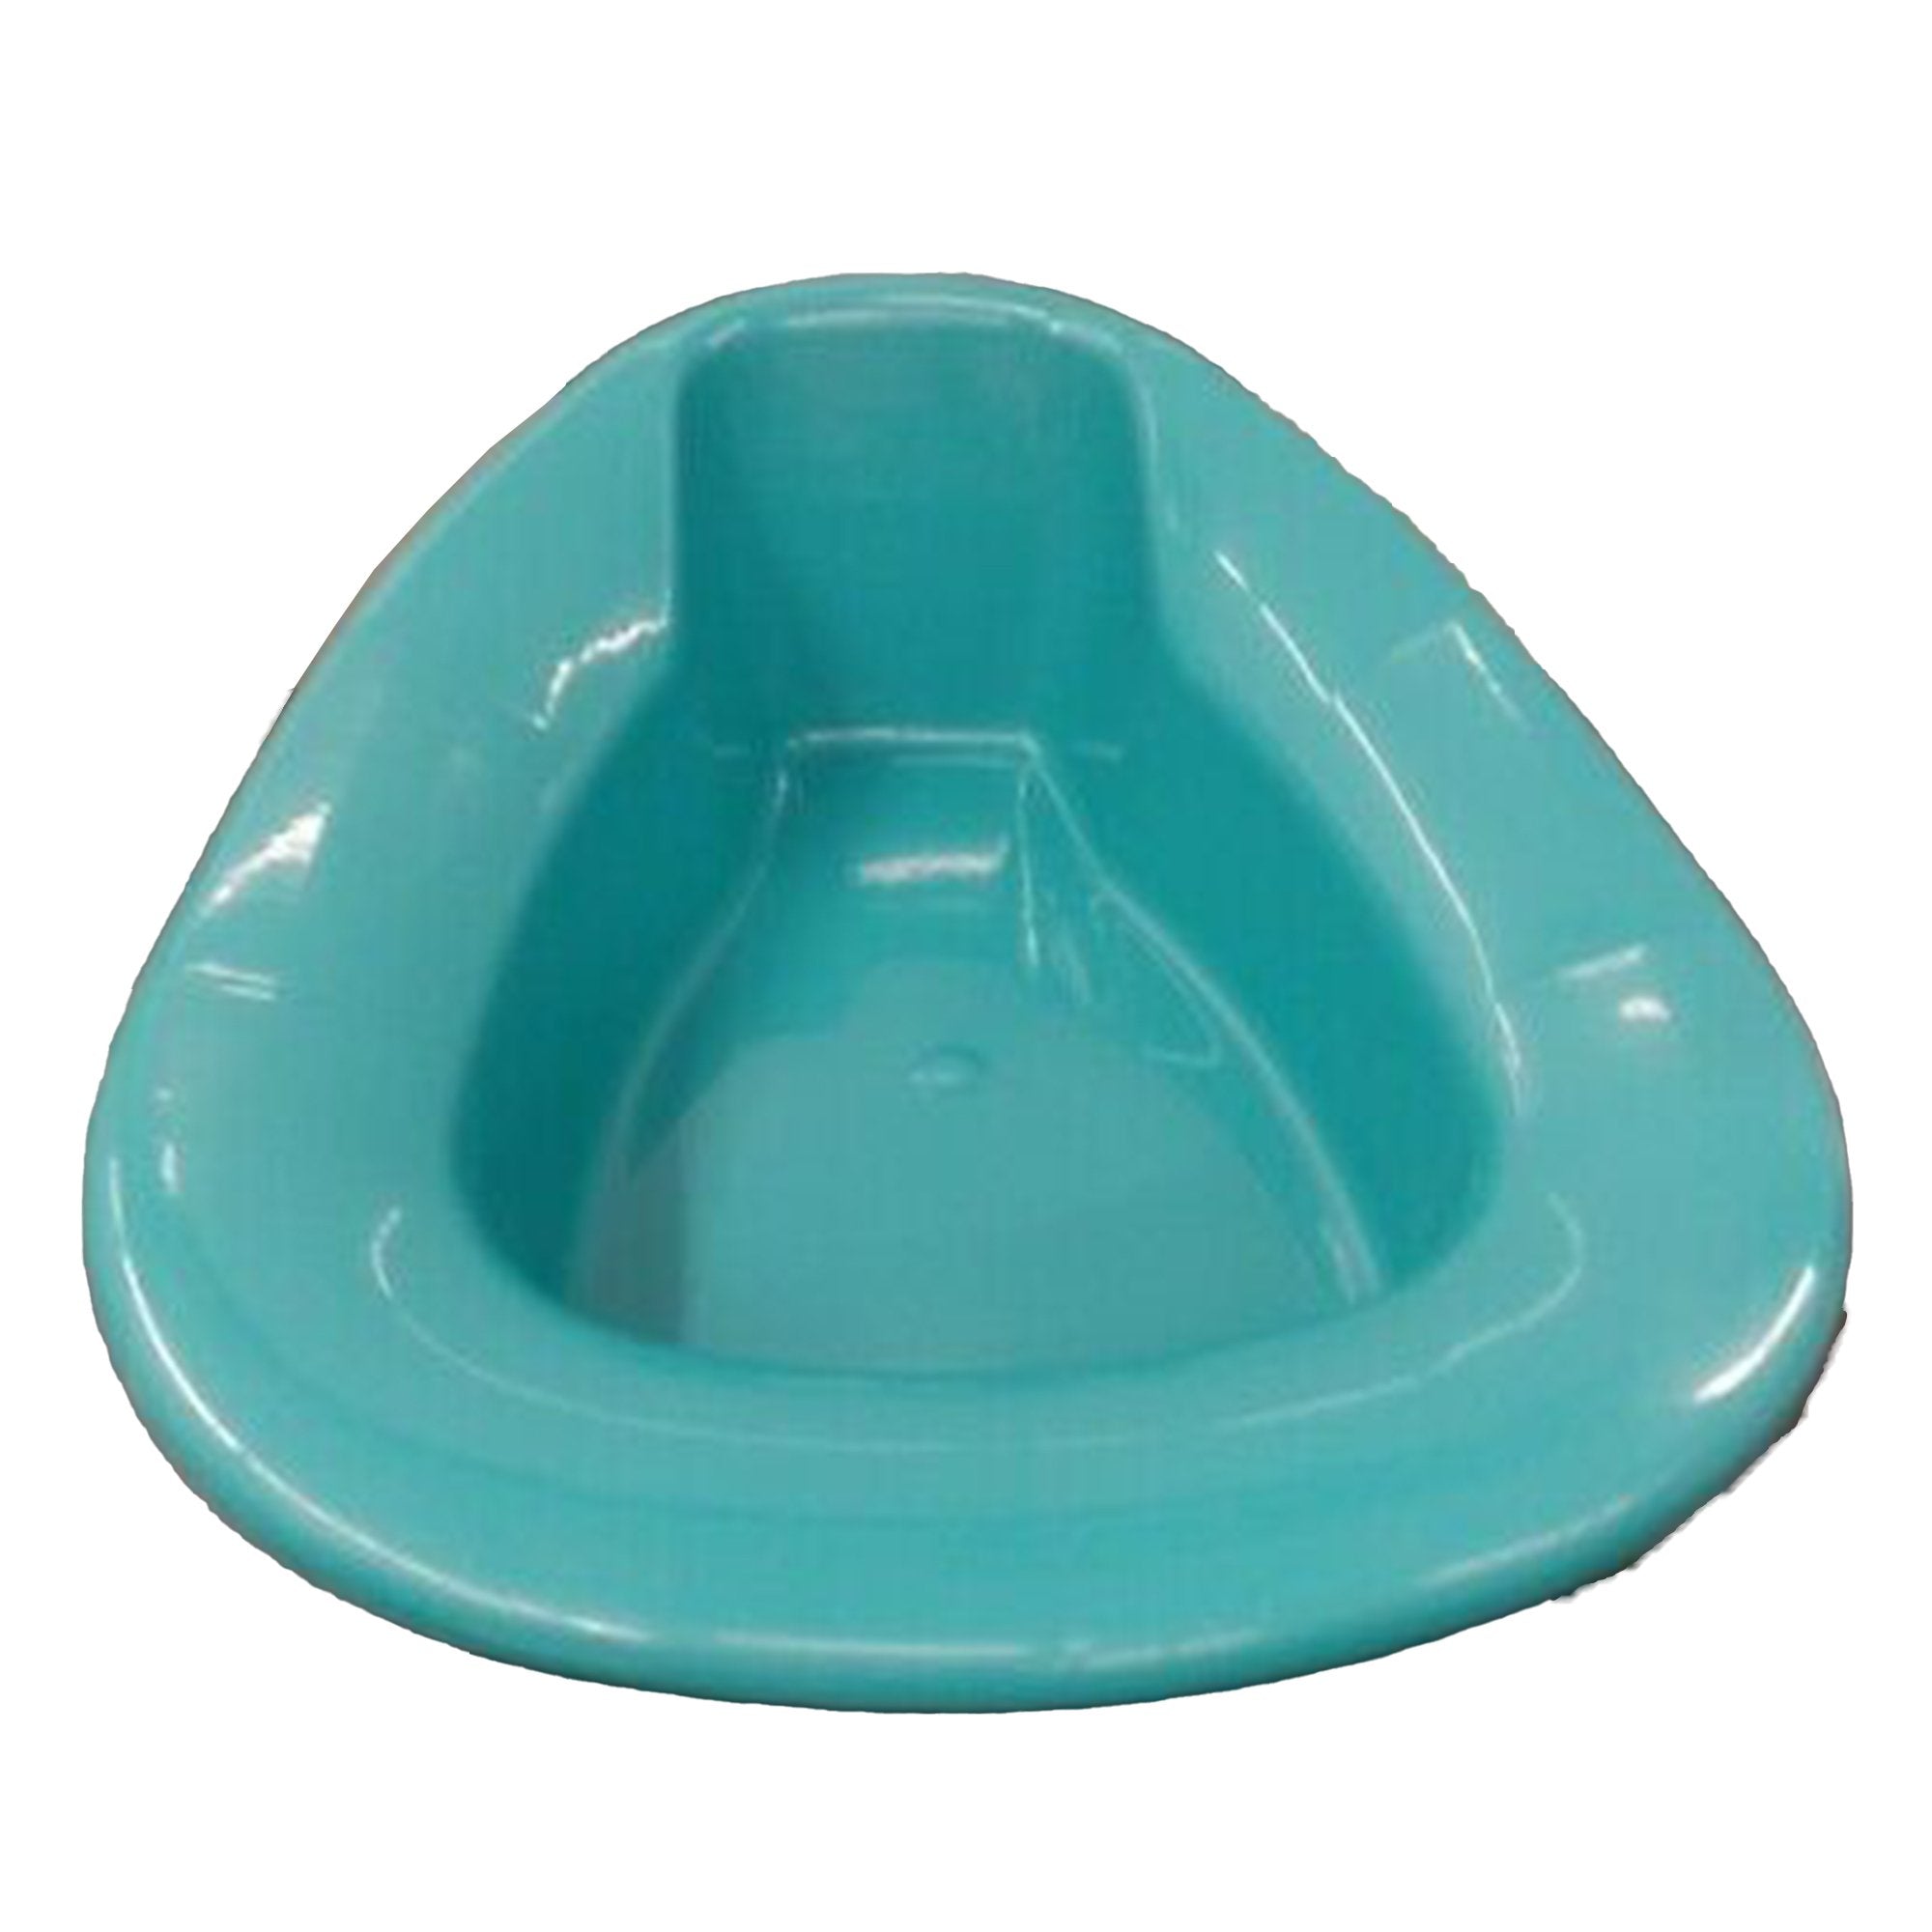 Stackable Bedpan GMAX Turquoise 2 Quart / 1893 mL